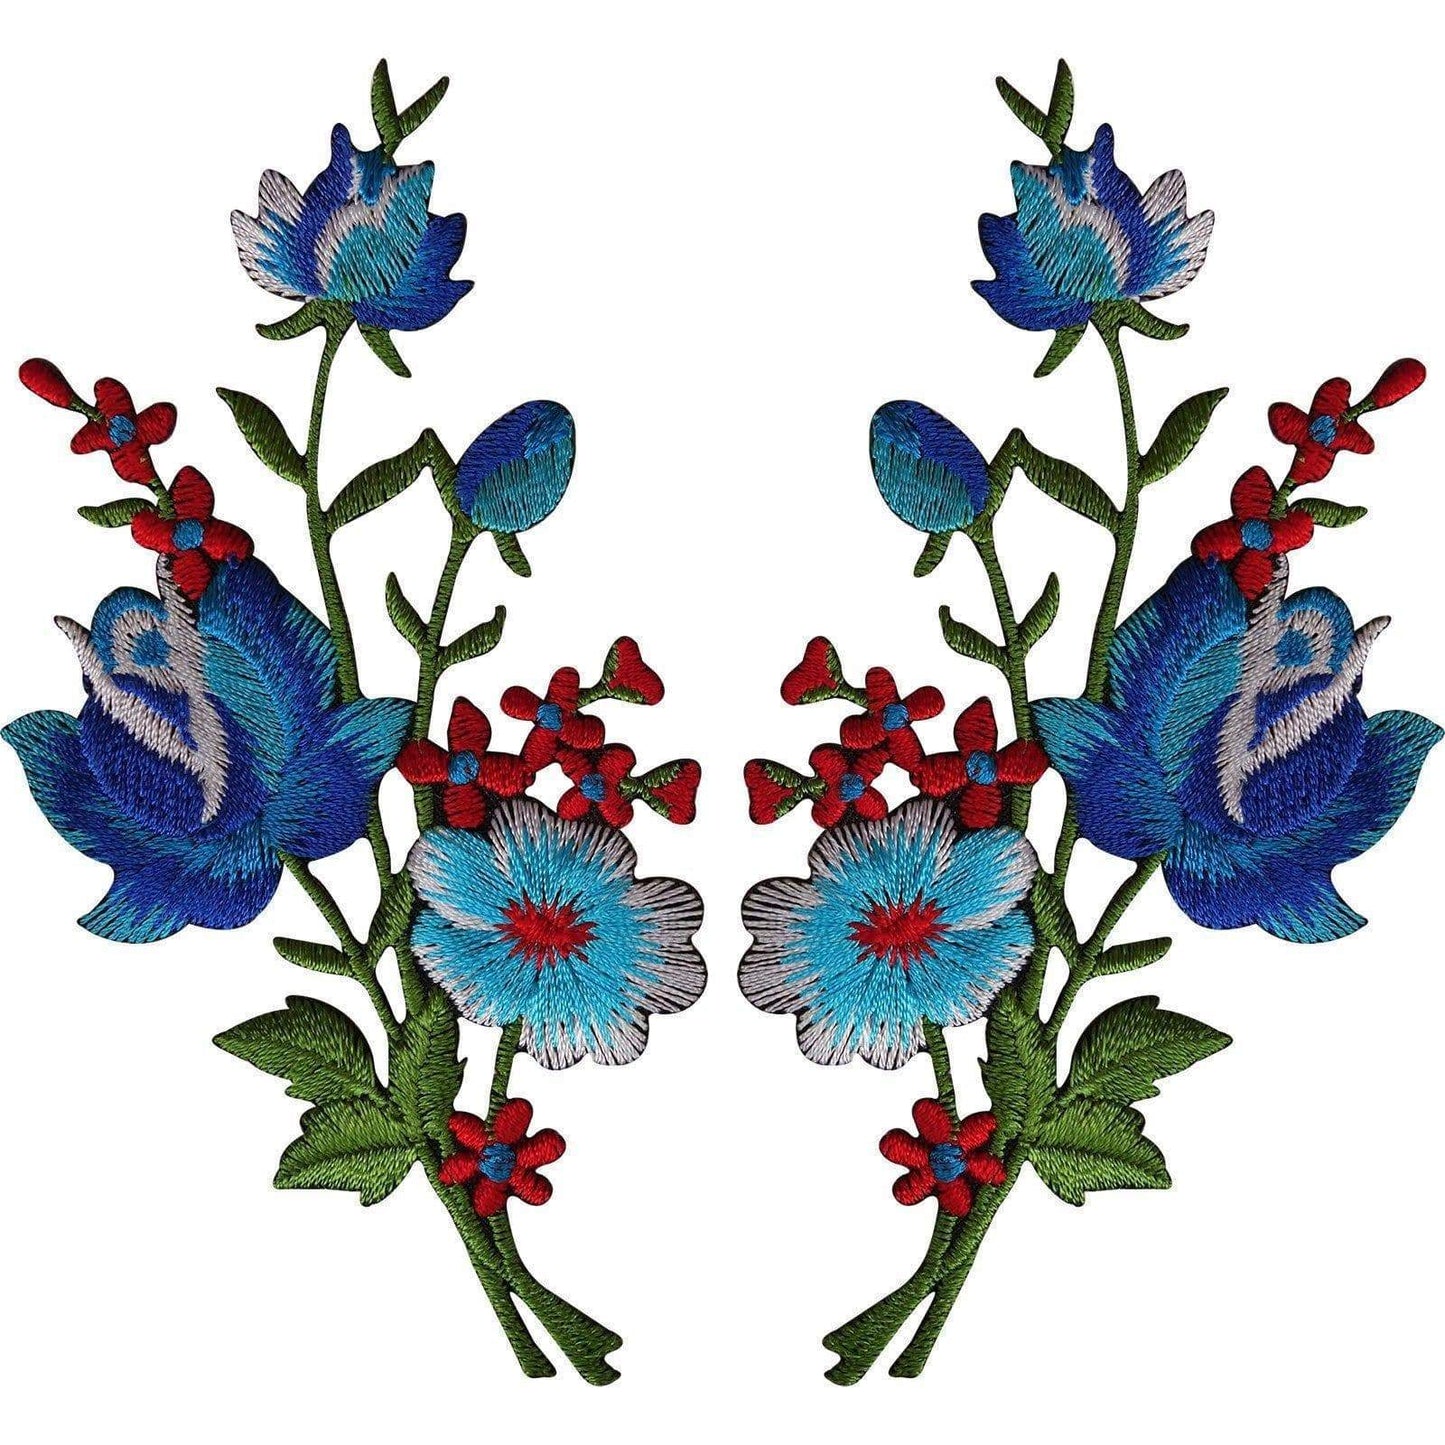 Pair of Flower Embroidered Patches Iron Sew On Floral Patch Badge Craft Applique